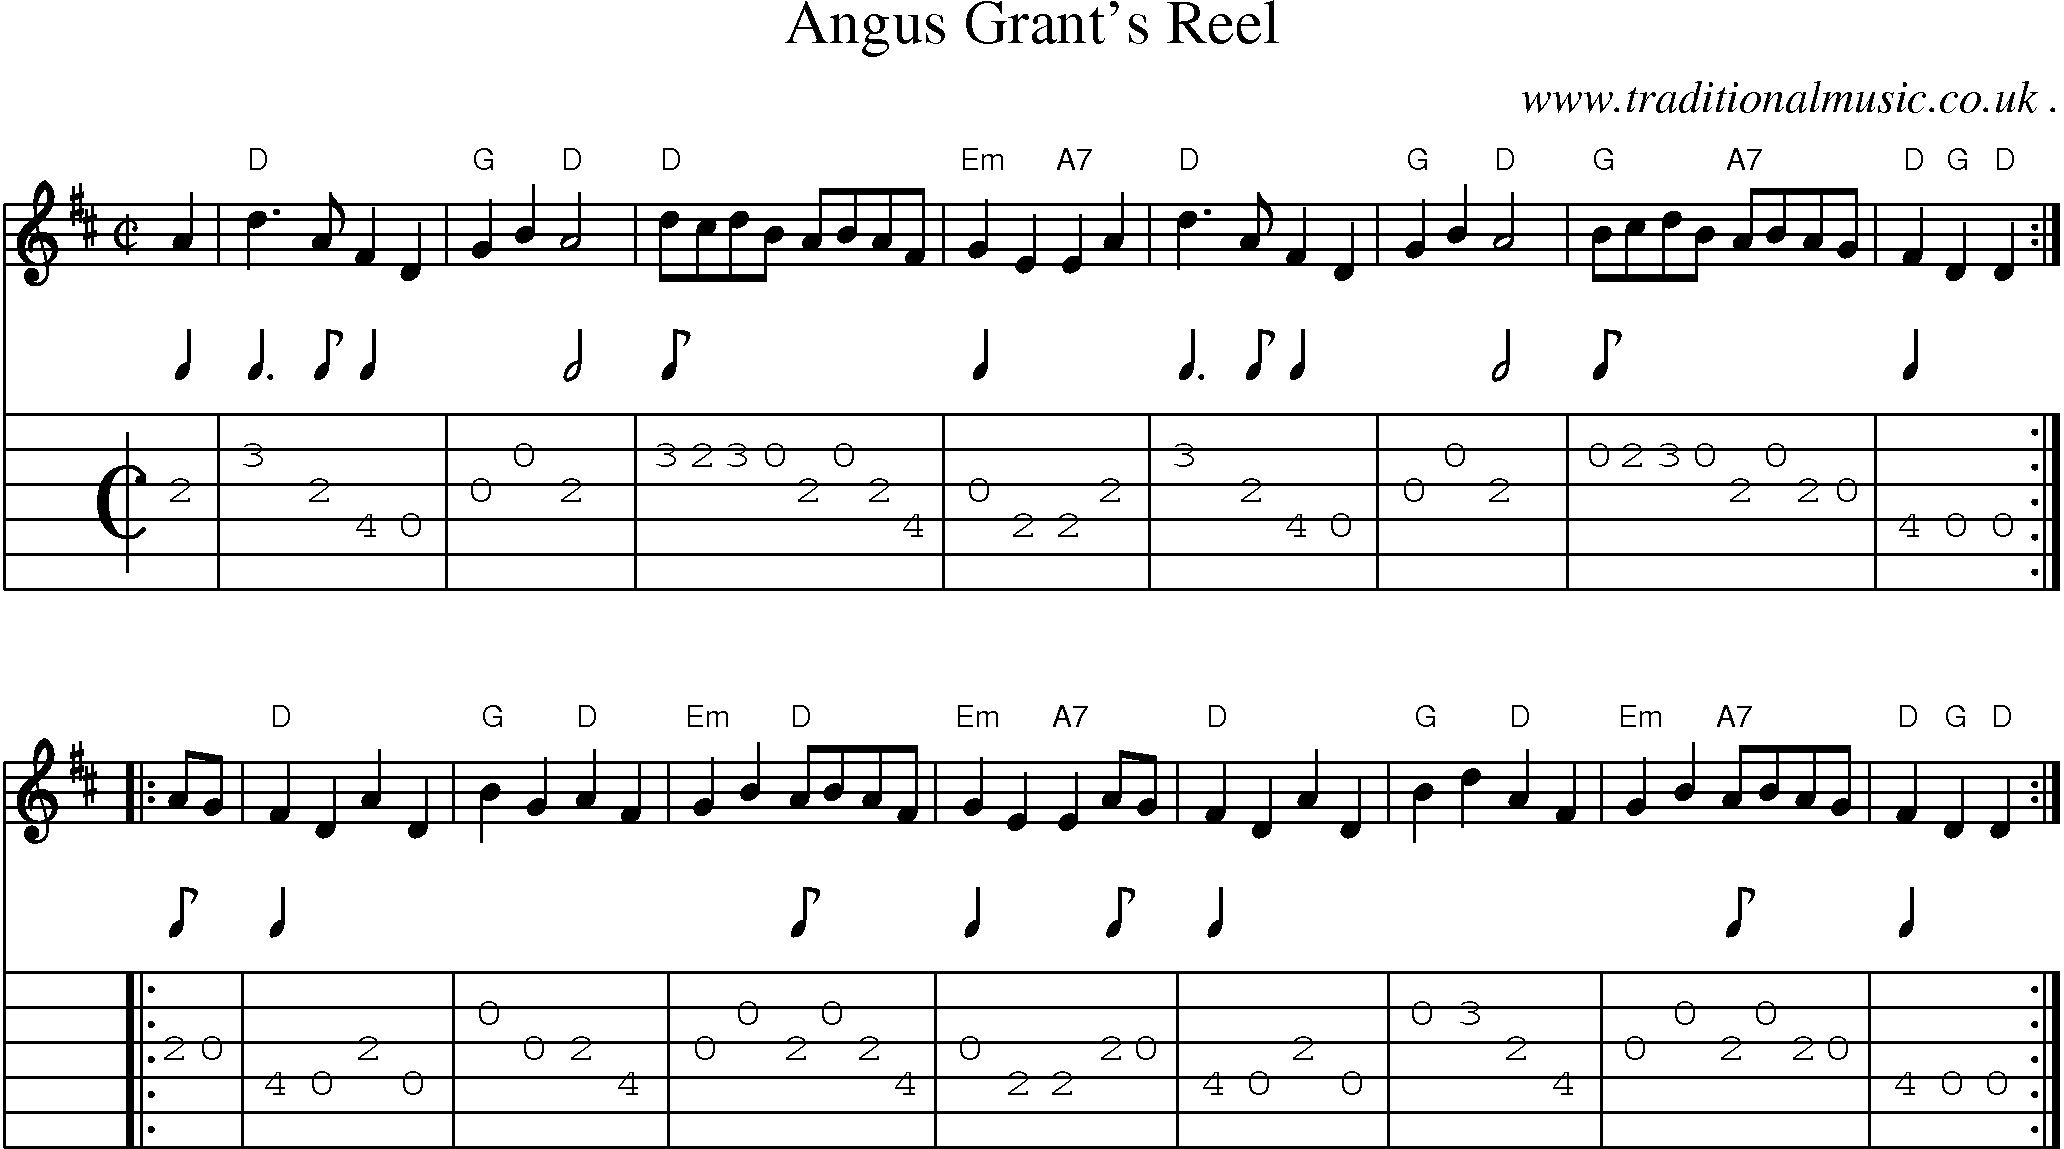 Sheet-music  score, Chords and Guitar Tabs for Angus Grants Reel